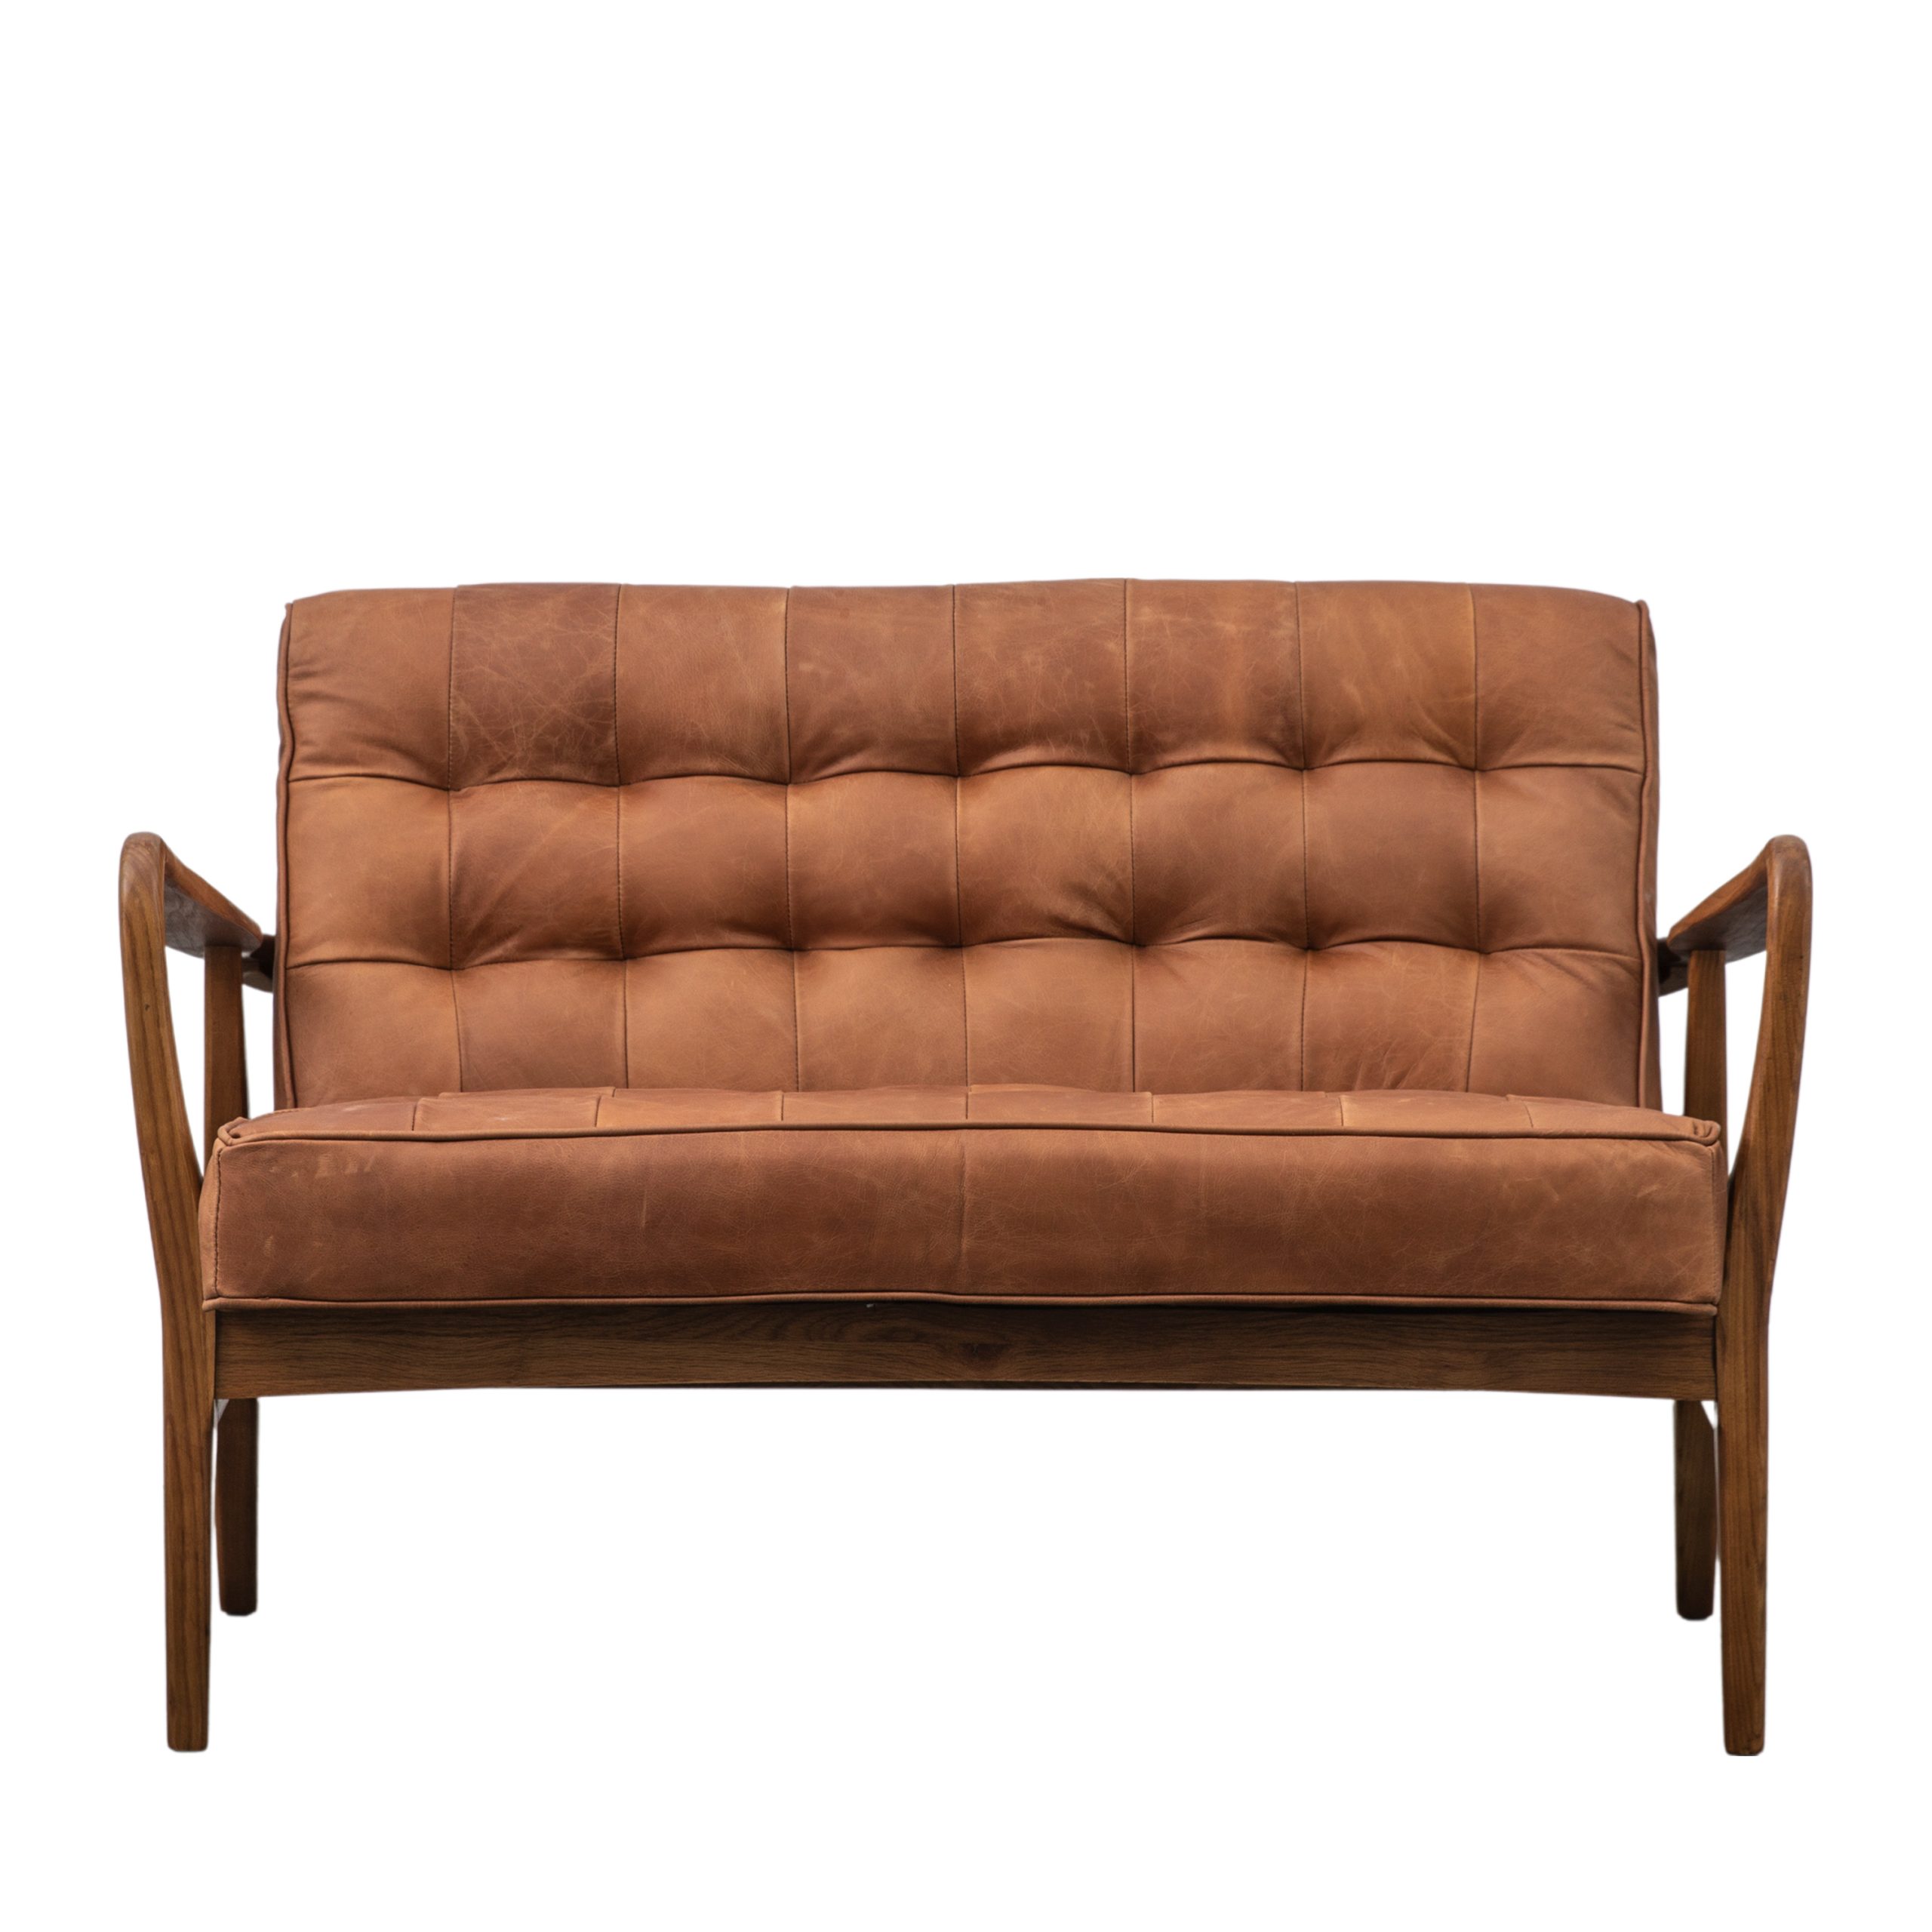 Gallery Direct Humber 2 Seater Sofa Vintage Brown Leather